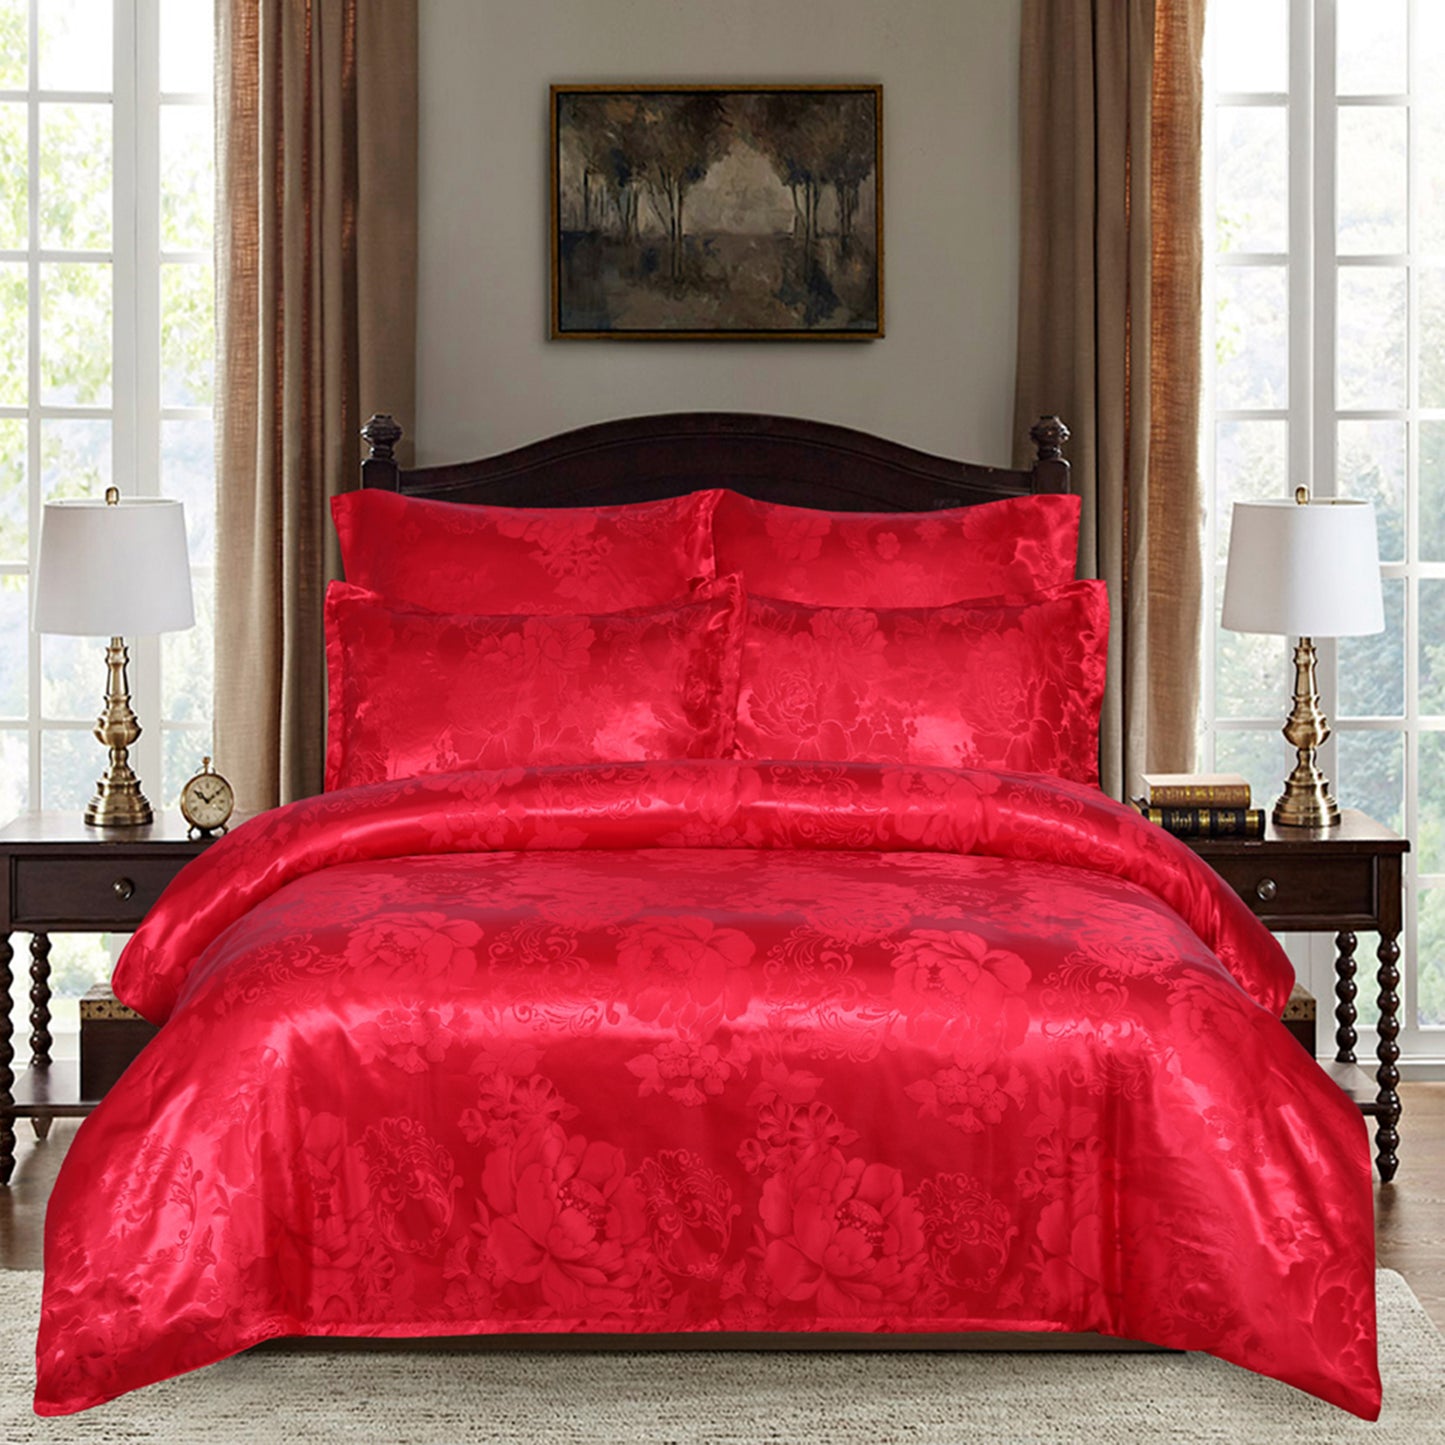 WONGS BEDDING Red Embroidery Satin Craft Duvet Cover Set With 2 Pillow Case